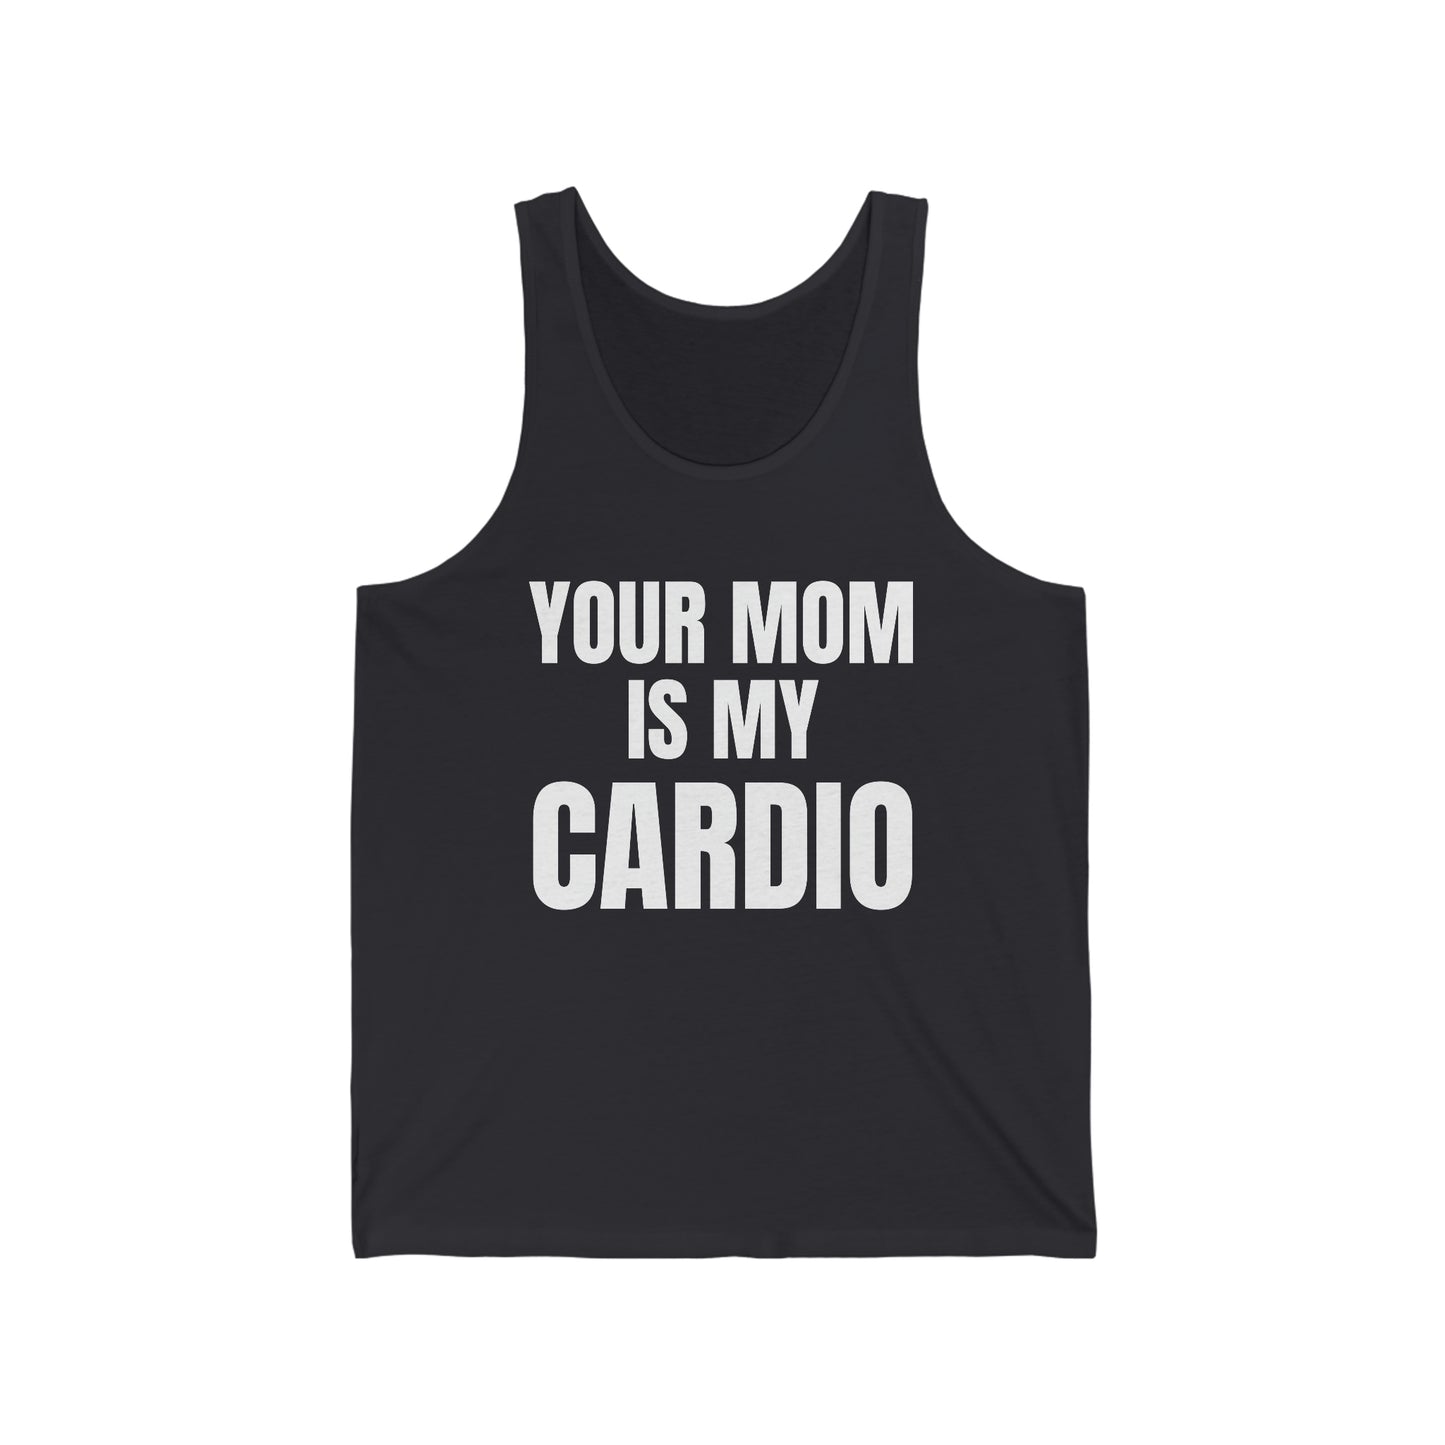 "Your Mom Is My Cardio" Unisex Jersey Tank